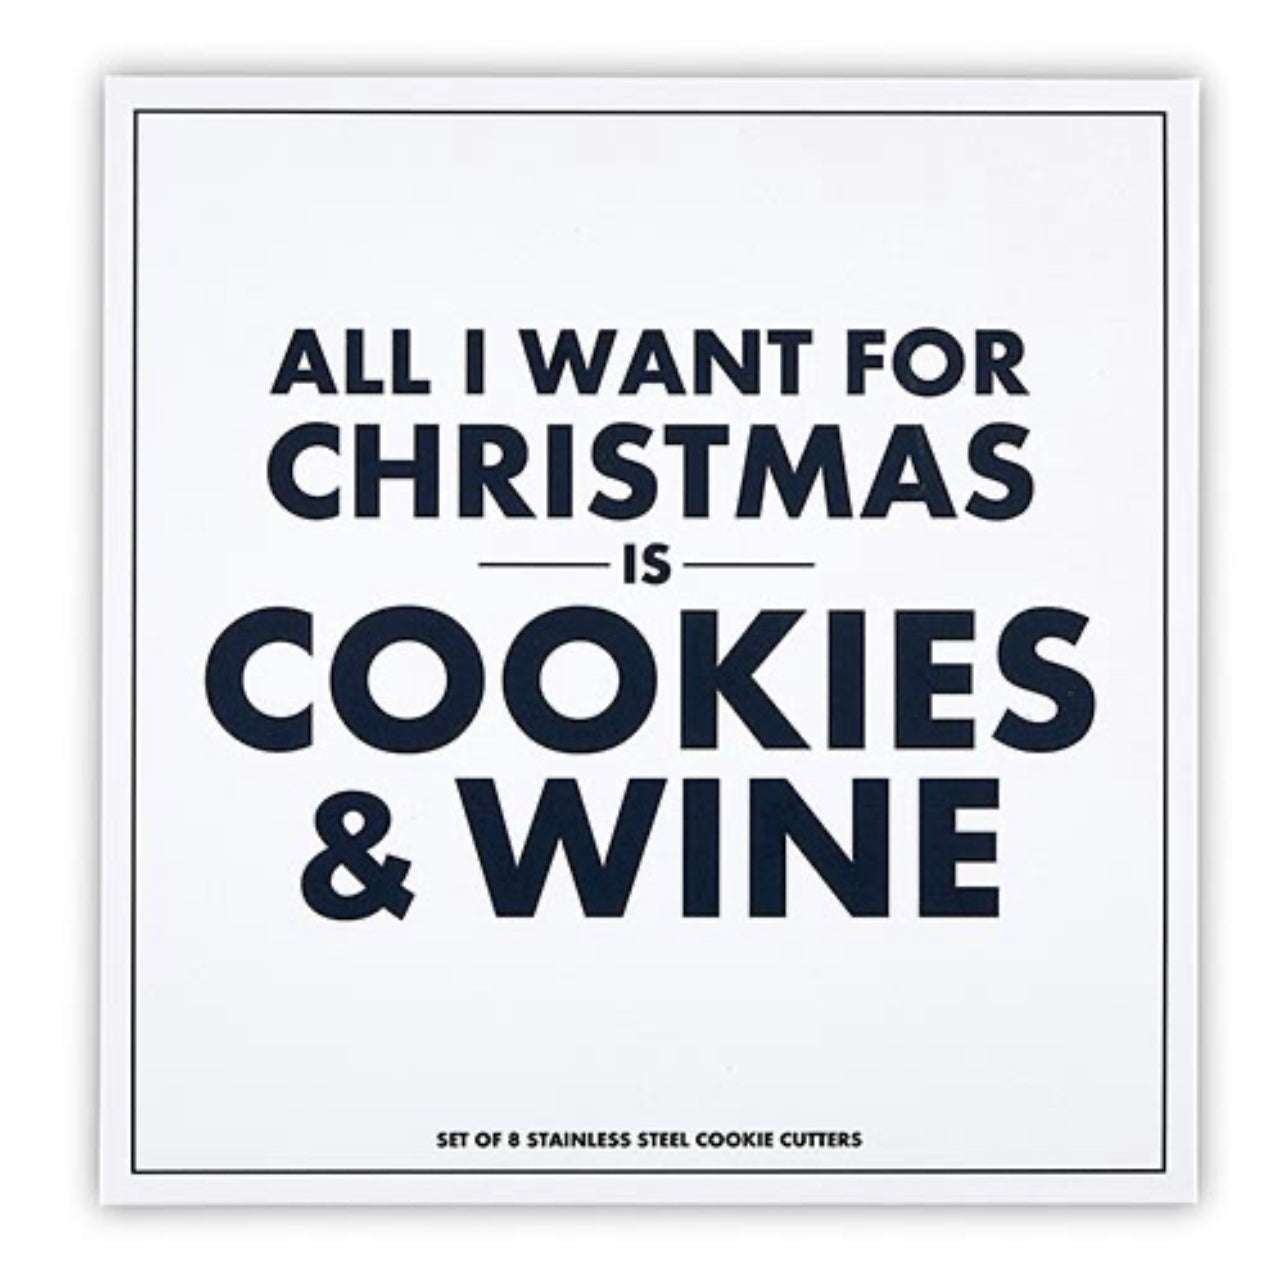 white gift box that contains set of 8 cookie cutters with bold black writing that says "all I want for christmas is cookies & wine"